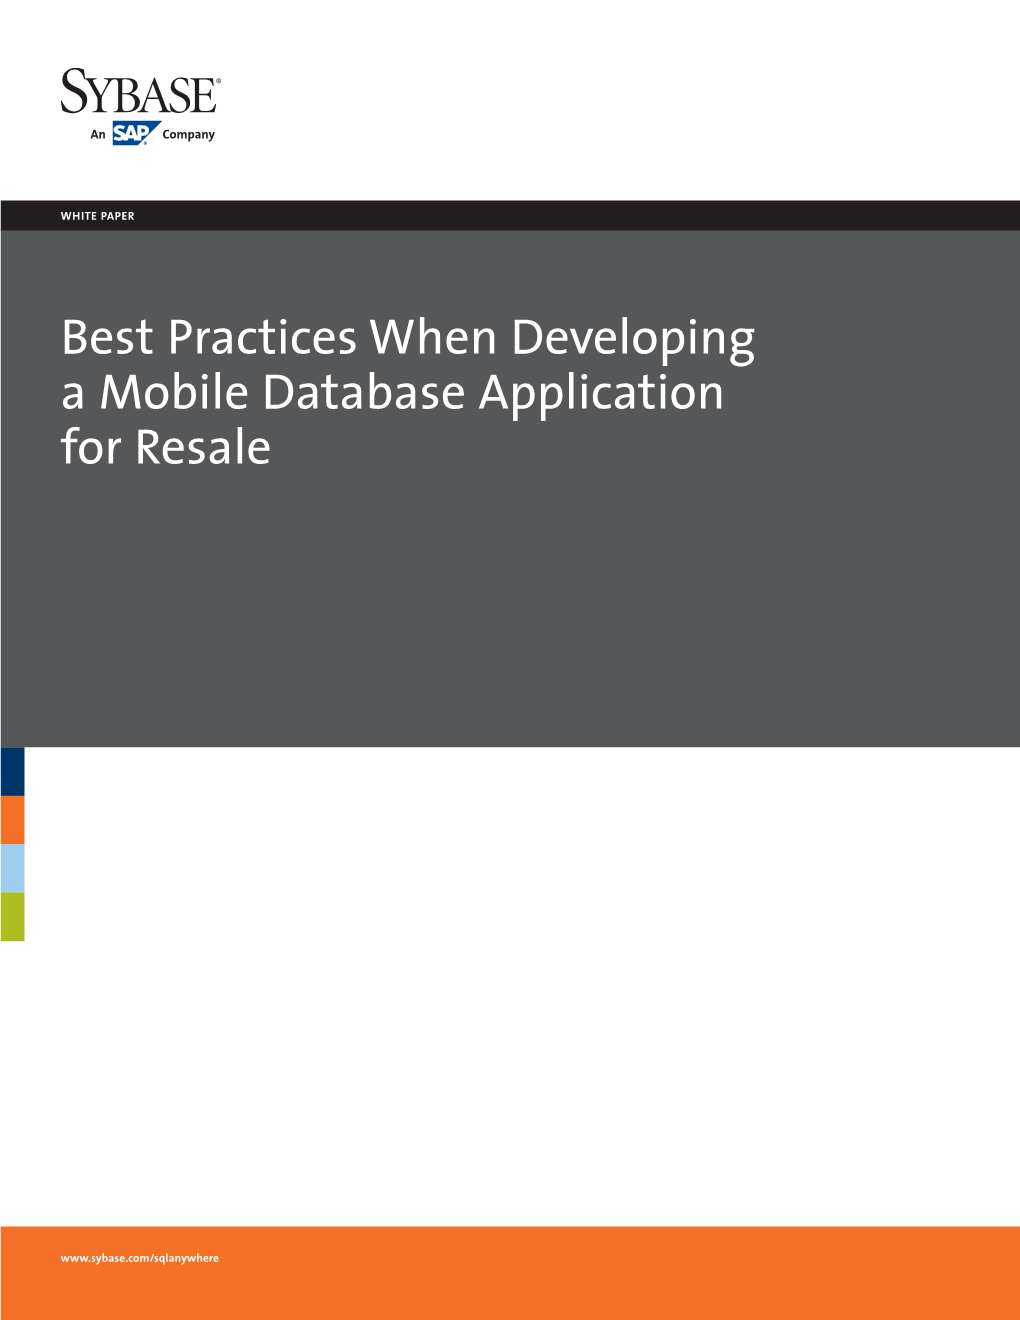 Best Practices When Developing a Mobile Database Application for Resale